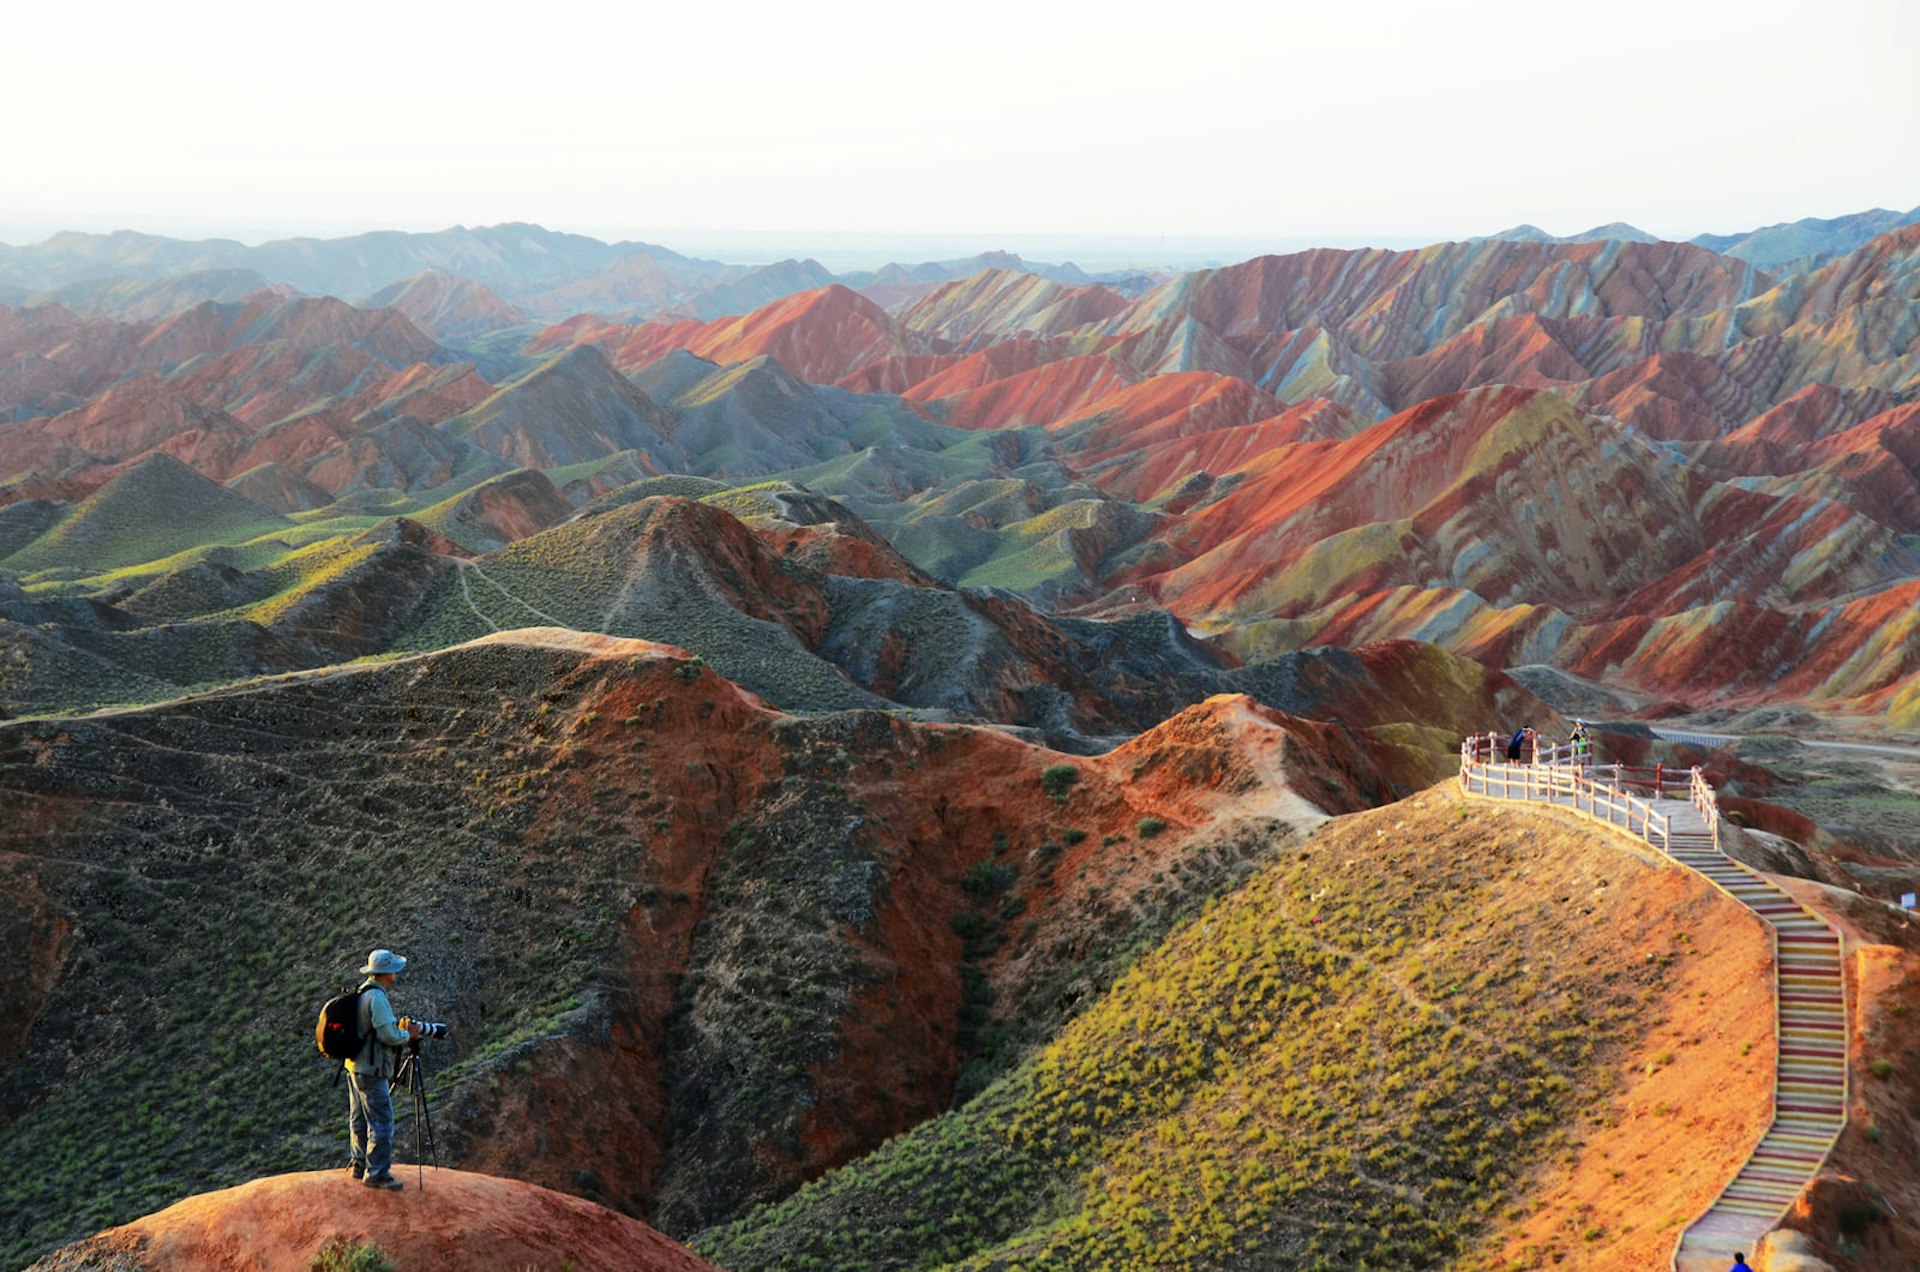 The colourful Zhangye Danxia Landform, concentrated predominantly in Linze and Sunan counties in Gansu Province, China © MelindaChan / Getty Images